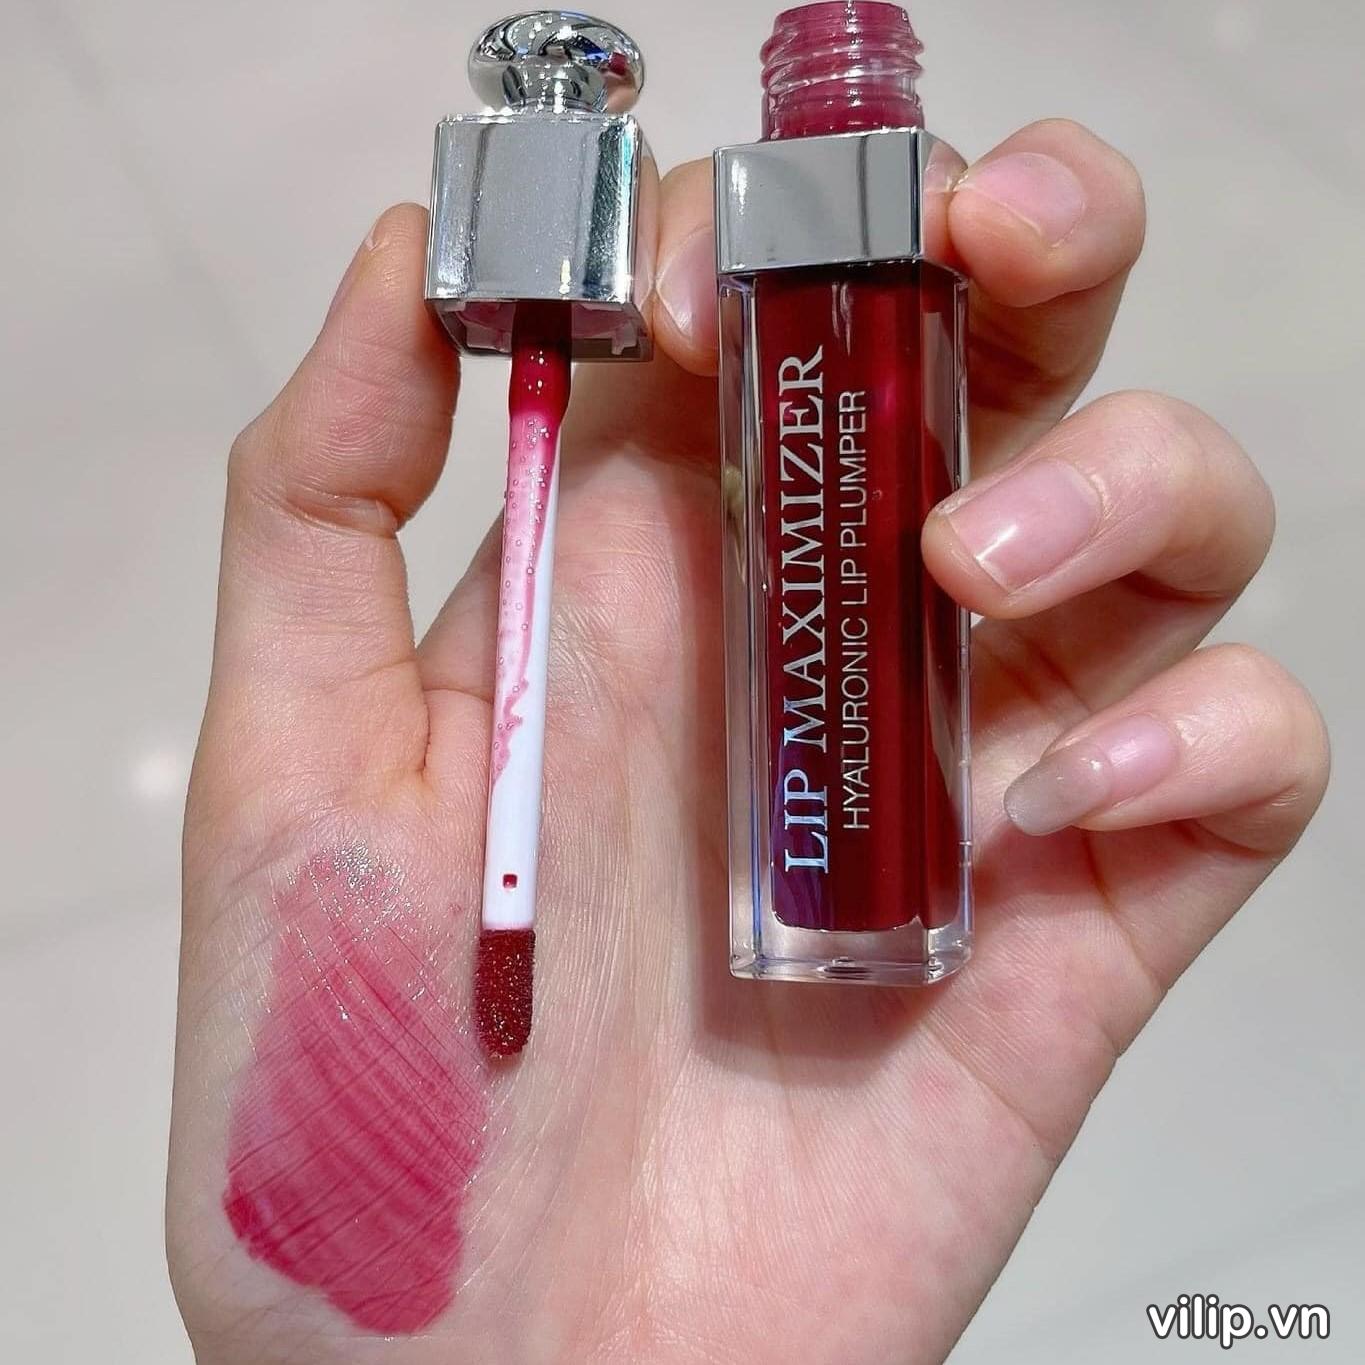 Dior  NEW SHADES Lip Maximizer Hyaluronic Lip Plumper Review and  Swatches  The Happy Sloths Beauty Makeup and Skincare Blog with Reviews  and Swatches